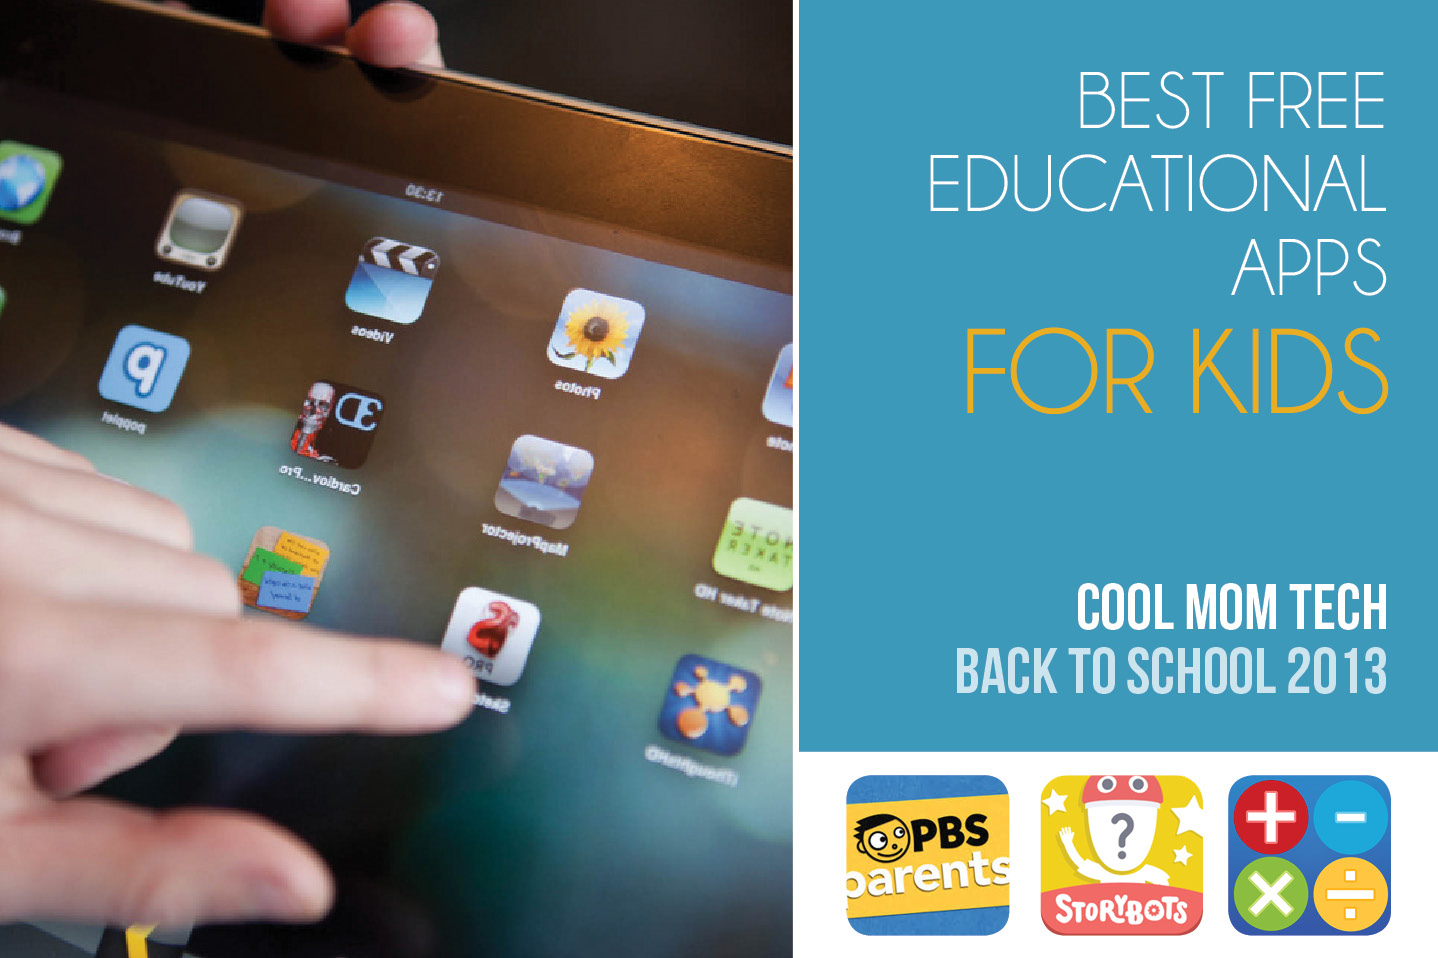 The best free educational apps for kids: Back to School Tech Guide 2013